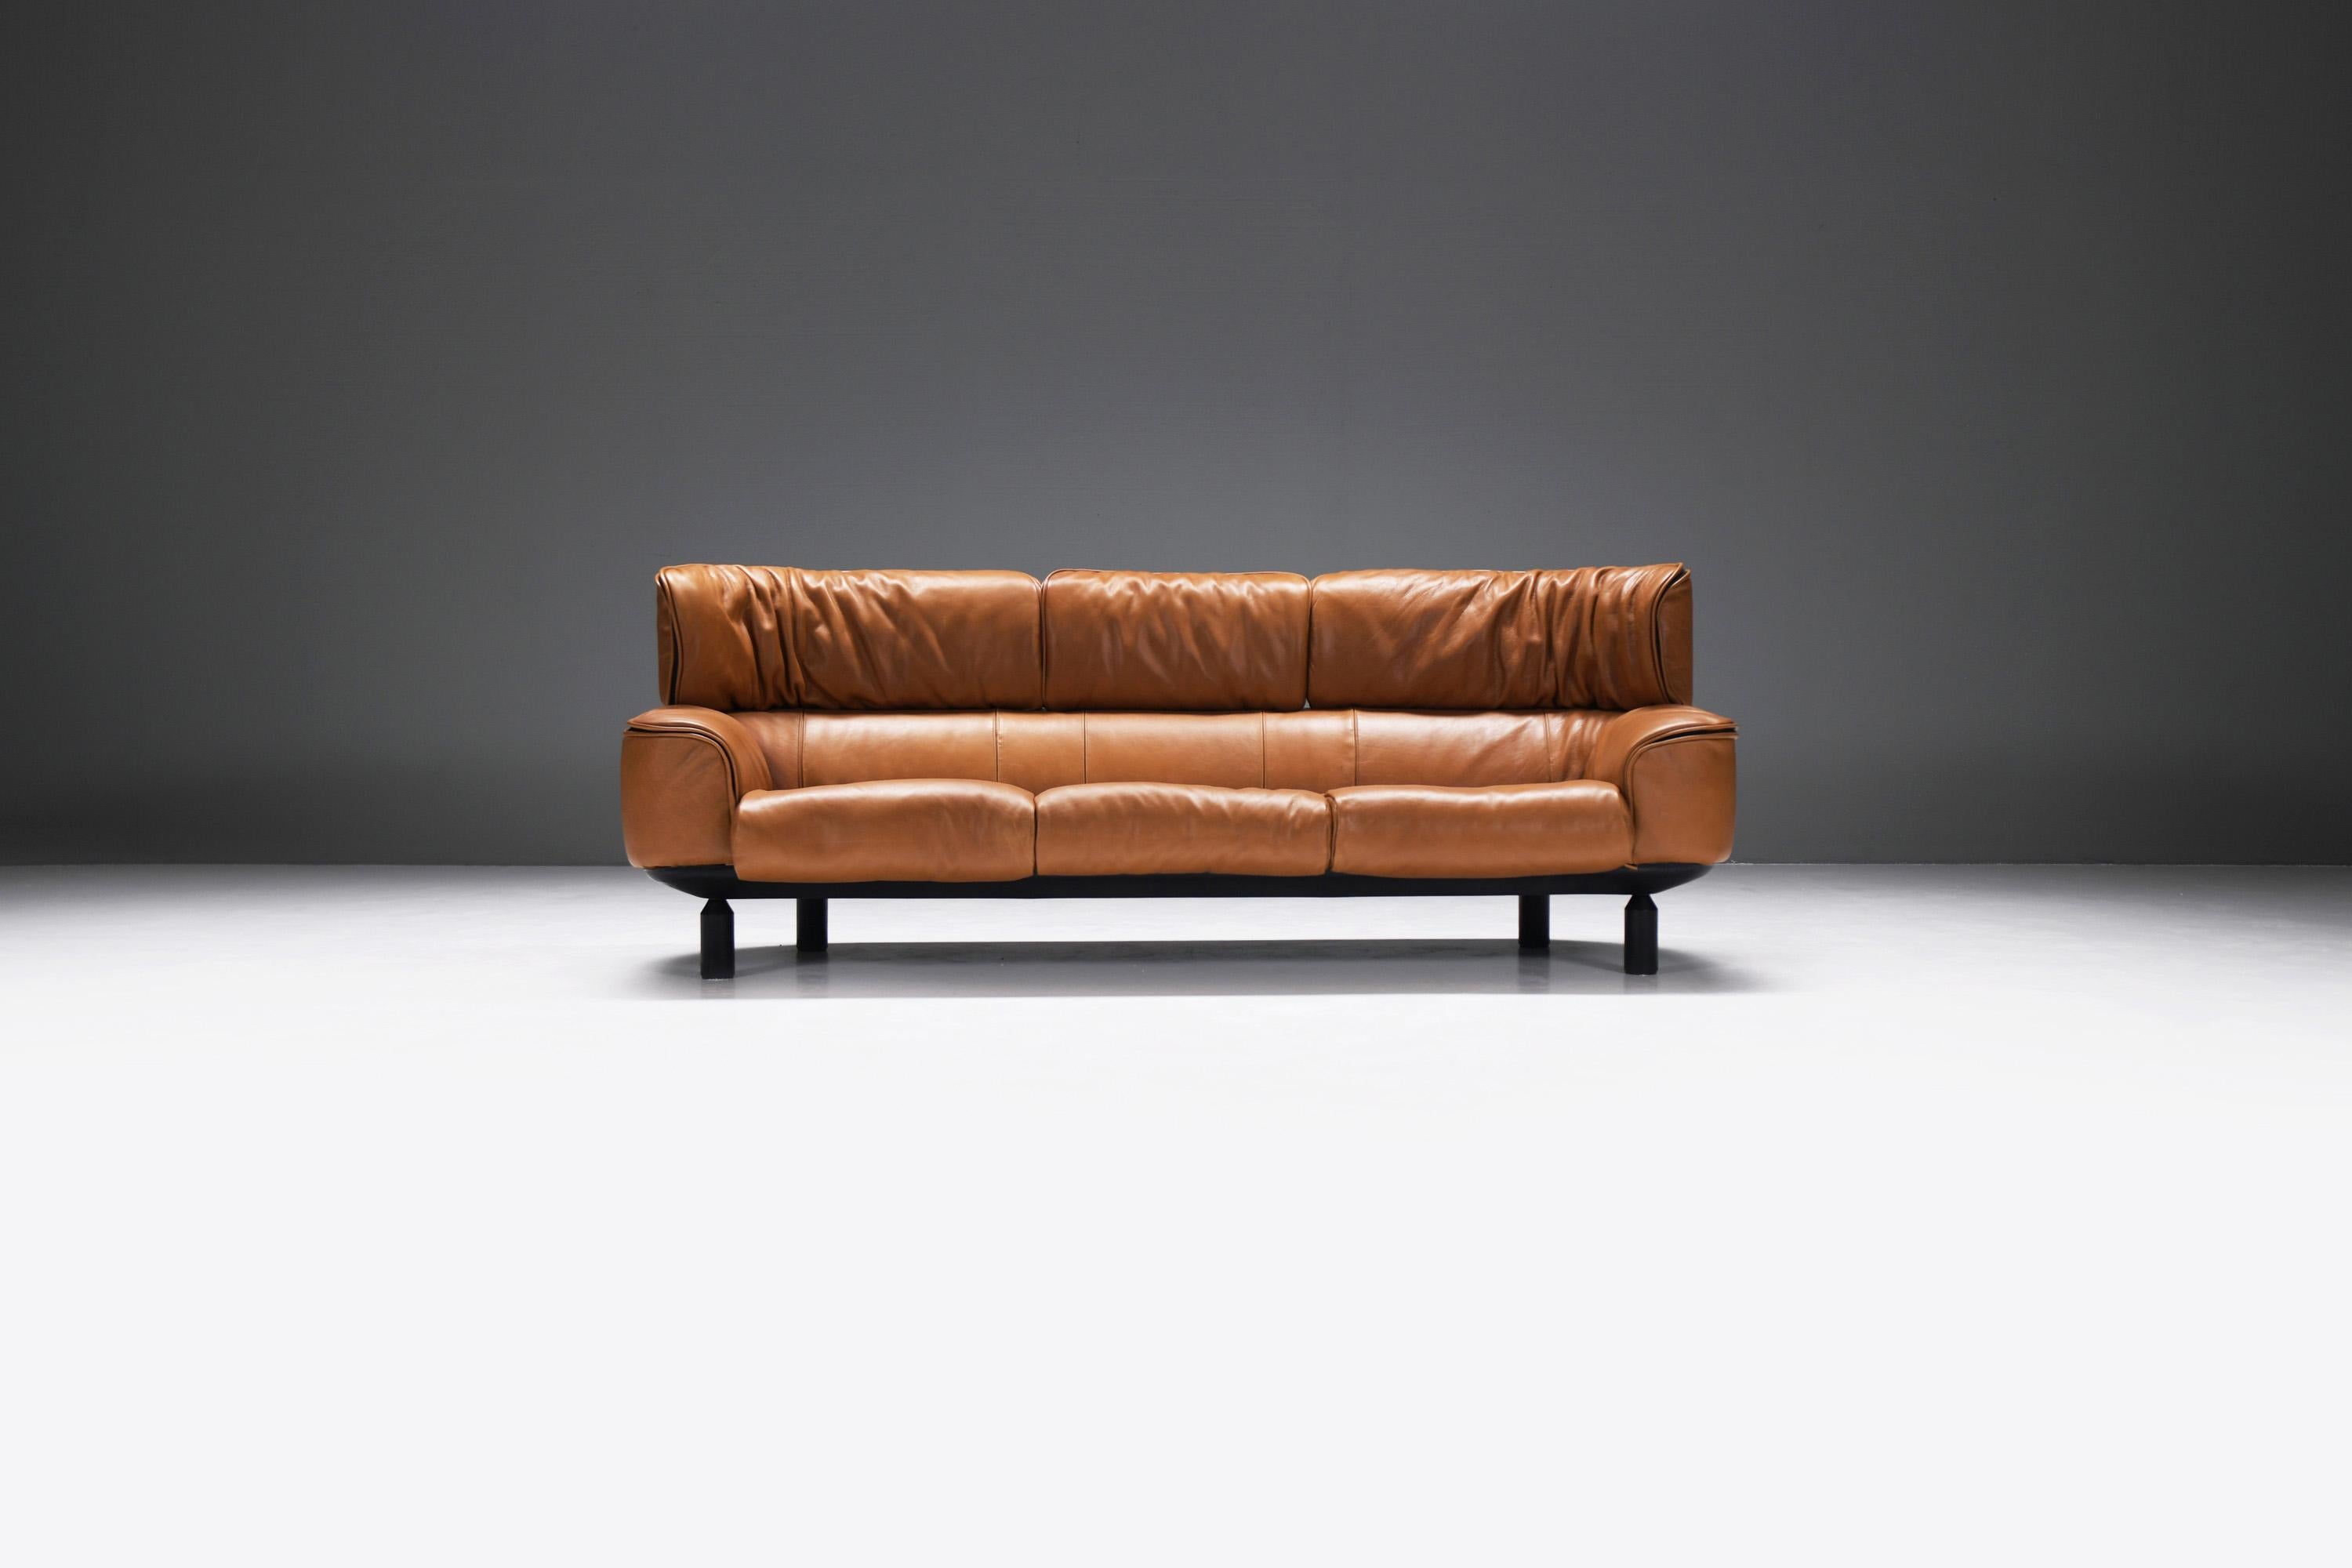 Extremely stylish Bull sofa in a perfect cognac leather!  What a beauty!!  This sofa was only produced for 1 year (1987)
Designed by Gianfranco Frattini for CASSINA.

The Bull sofa  was Frattini's last project for Cassina. The collection included